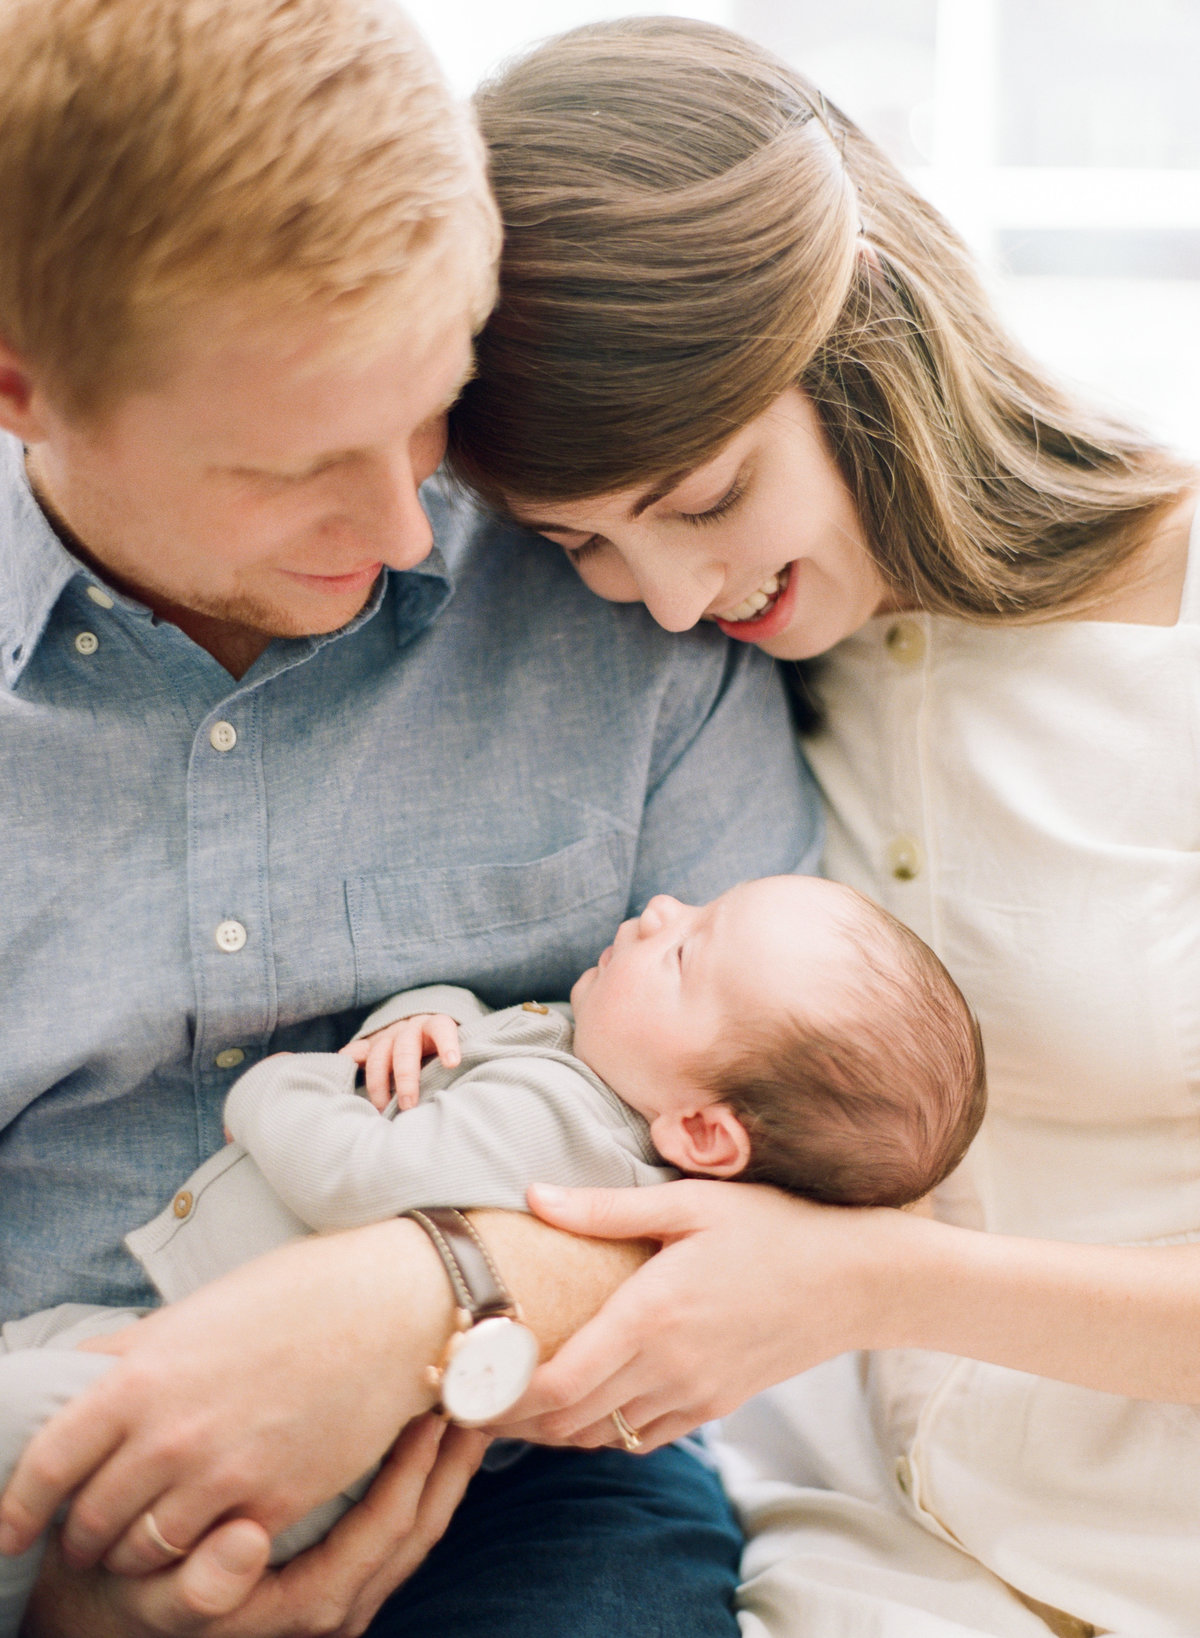 Mom and dad snuggle their newly adopted son during their Raleigh newborn session. Photographed by Raleigh Newborn Photographer A.J. Dunlap Photography.